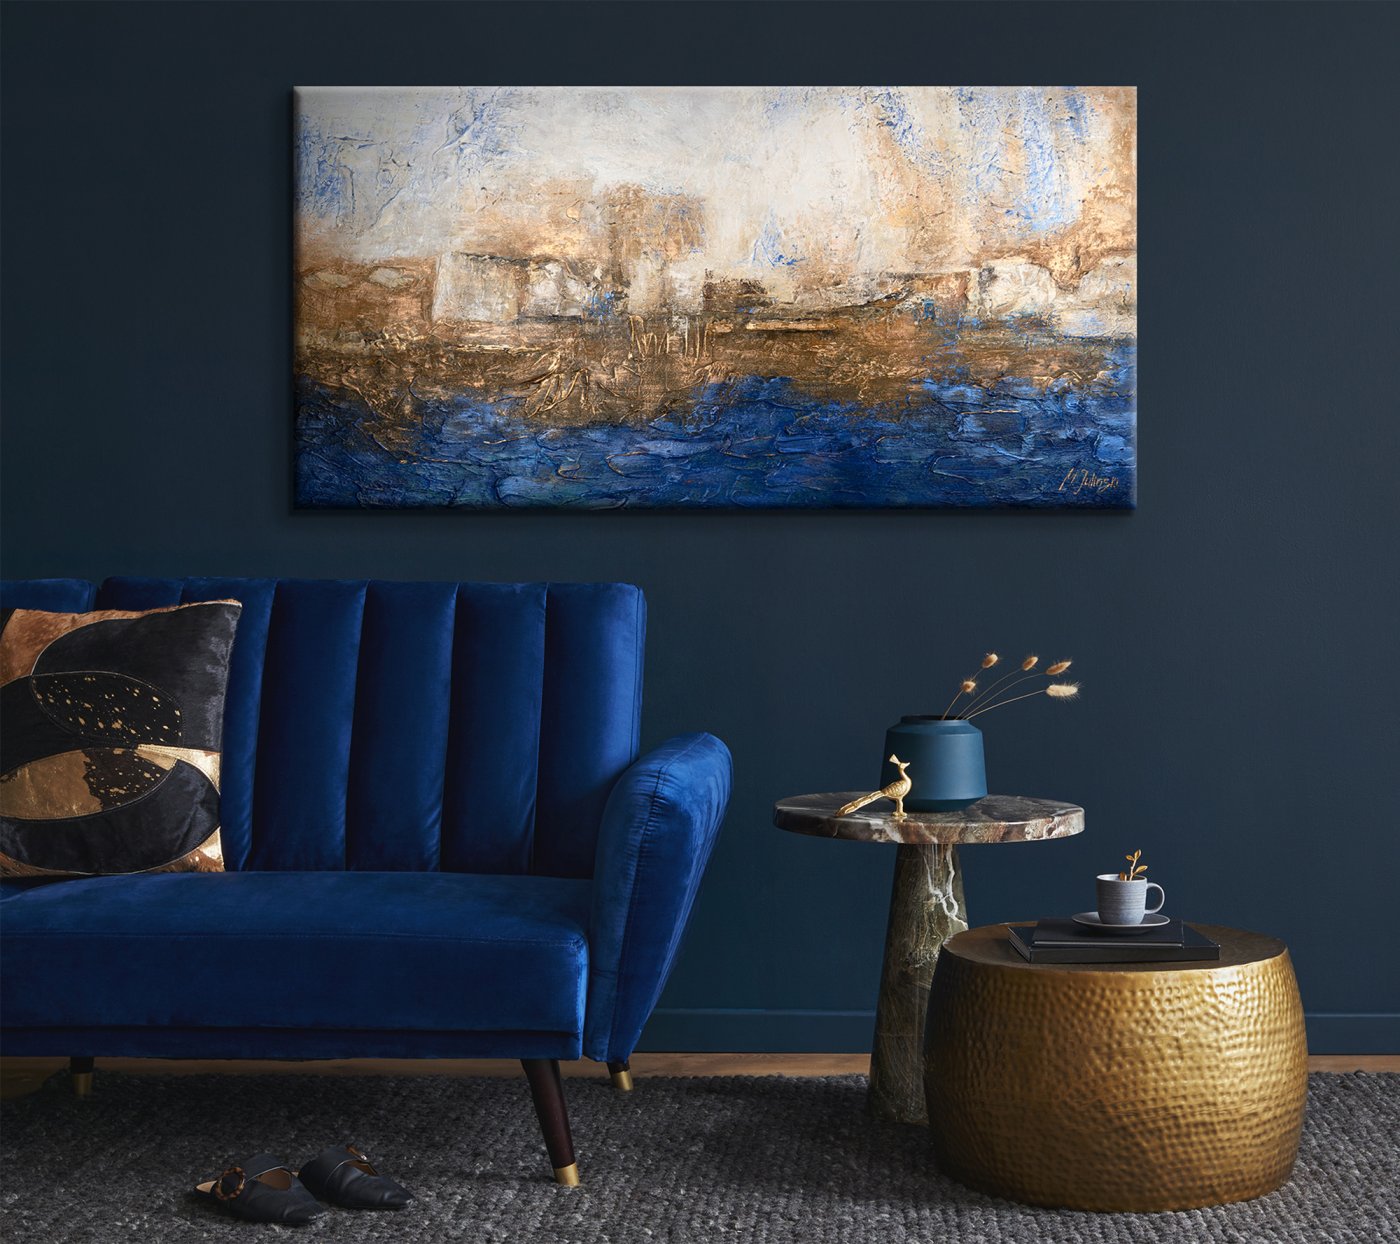 Handcrafted Artwork for Modern Interiors